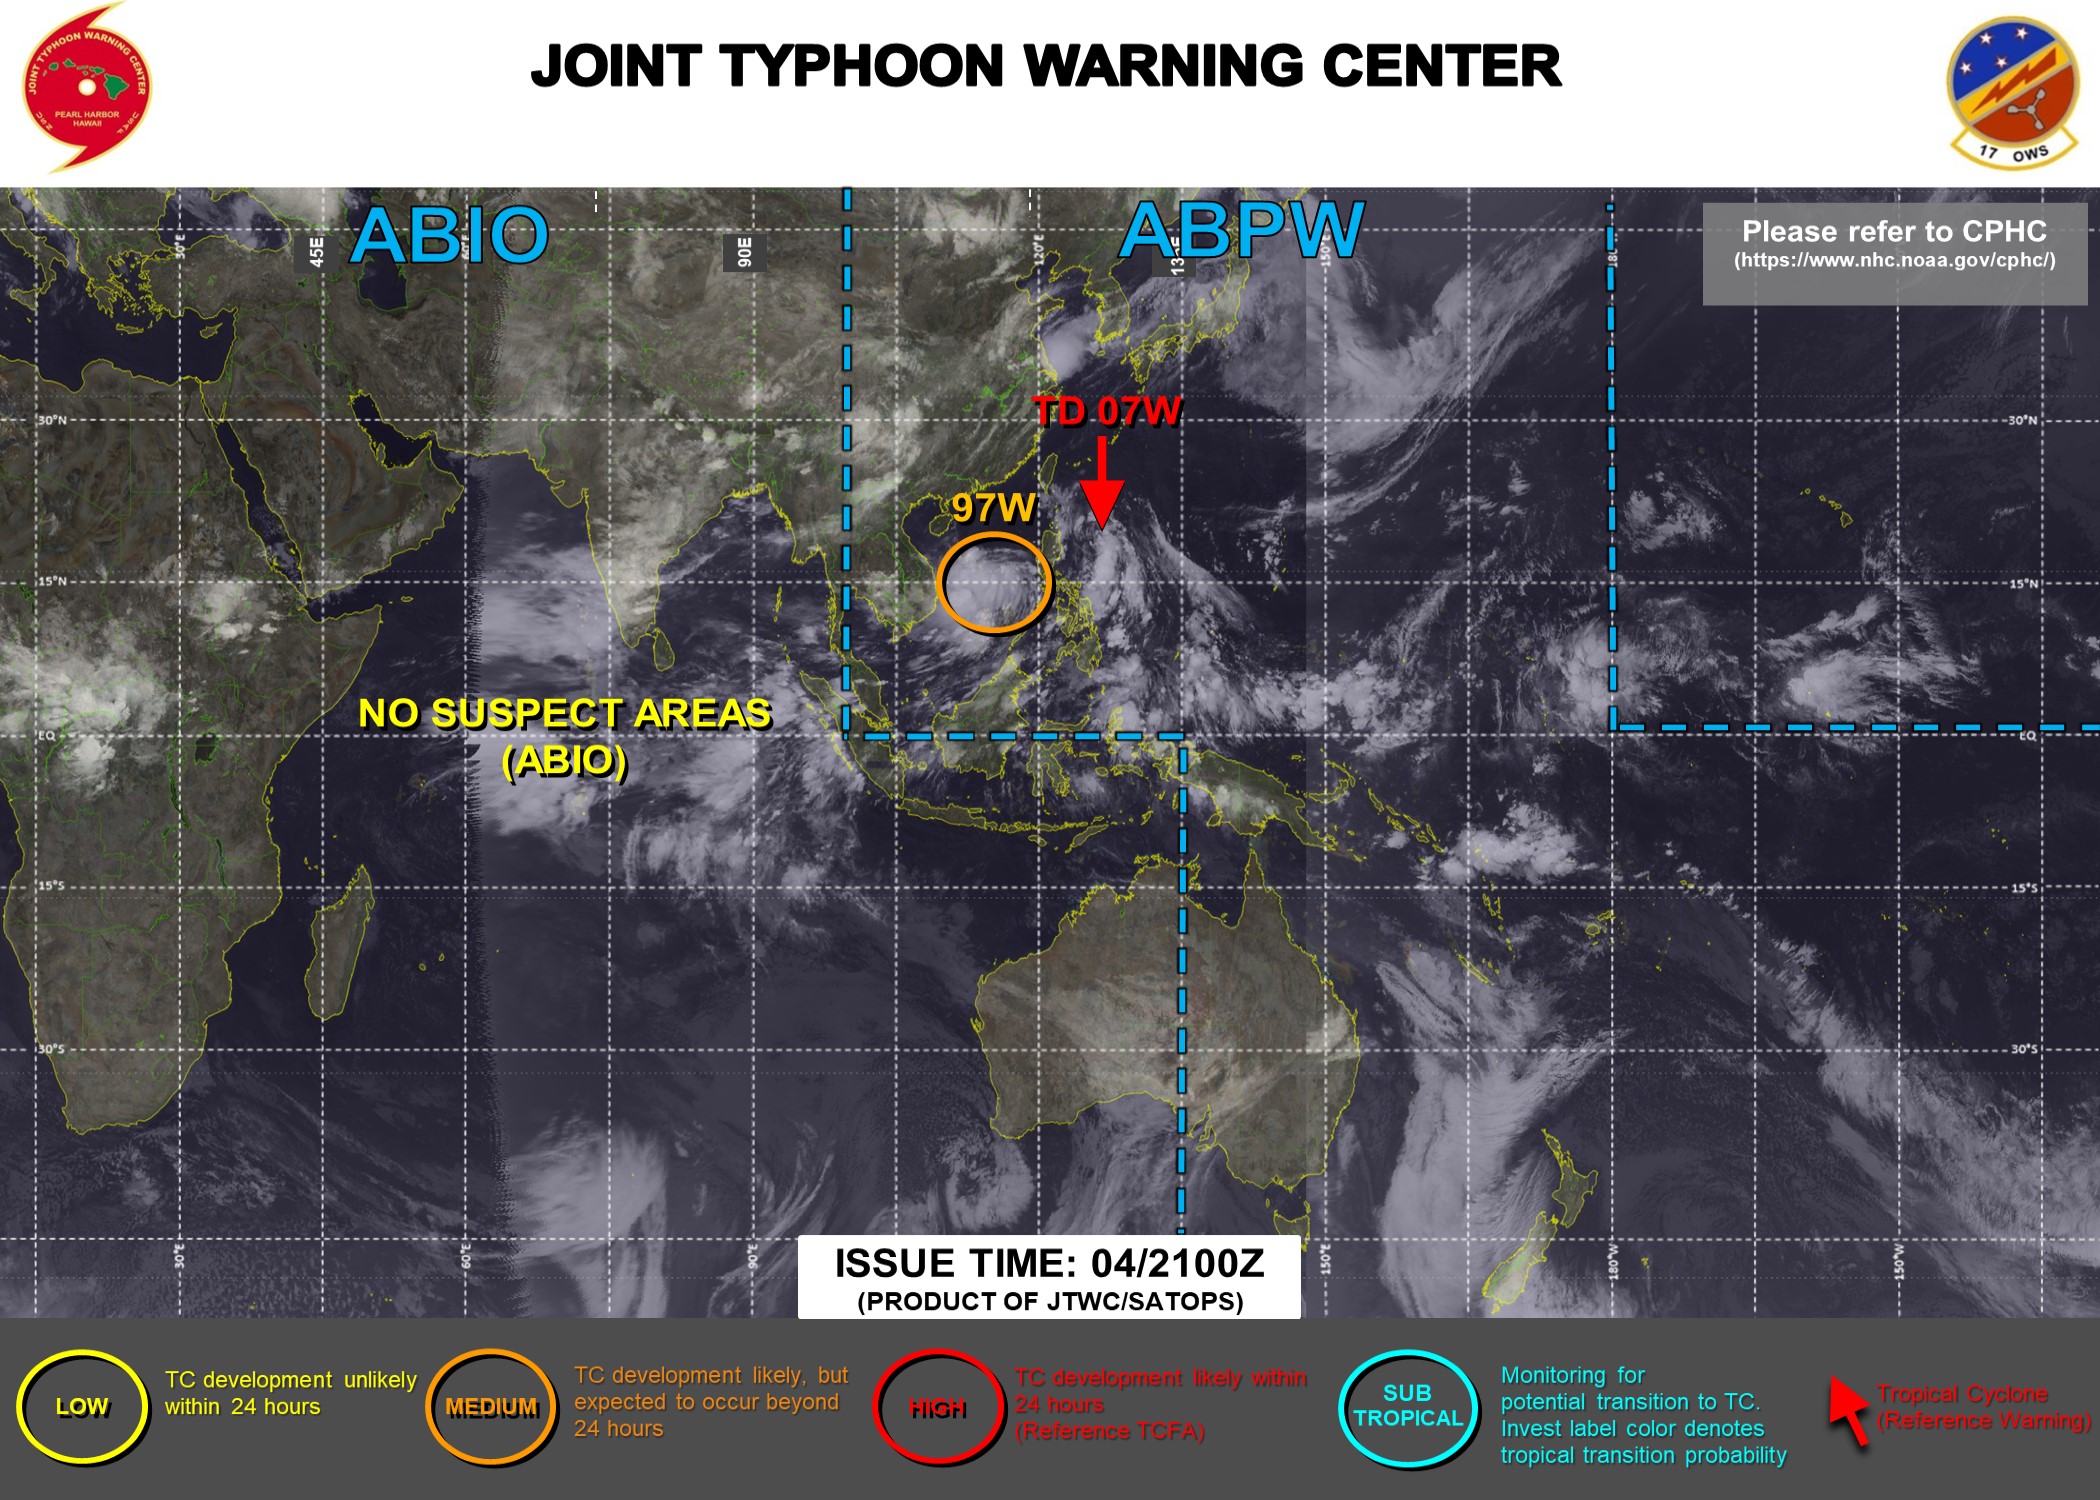 JTWC IS ISSUING 6HOURLY WARNINGS AND 3HOURLY SATELLITE BULLETINS ON TD 07W. INVEST 97W IS STILL MEDIUM.